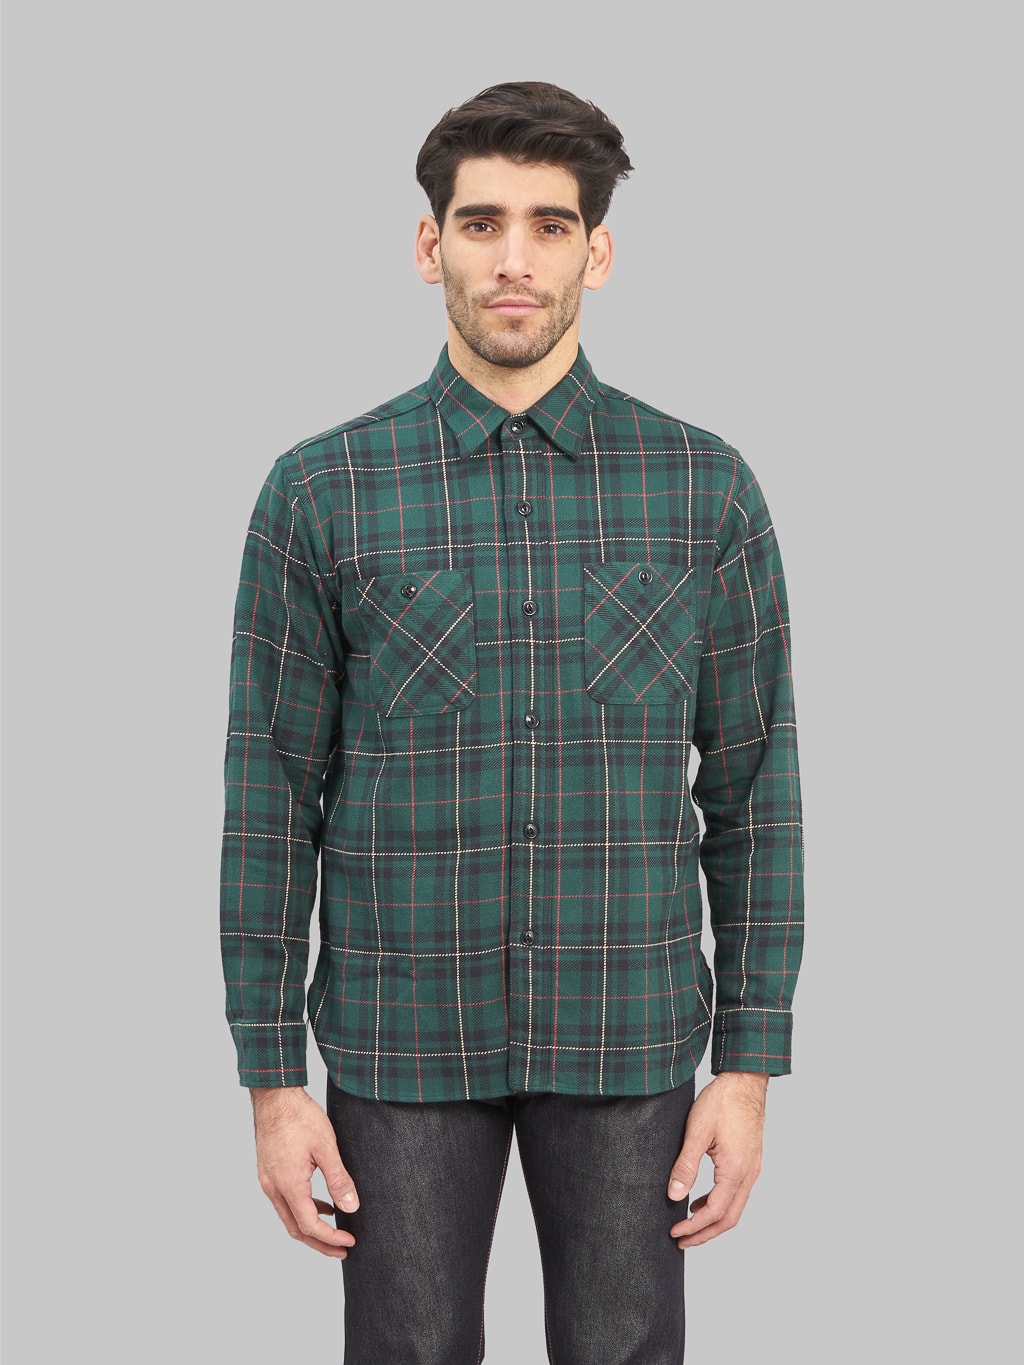 Sugar Cane Twill Check Flannel Shirt green model front  fit